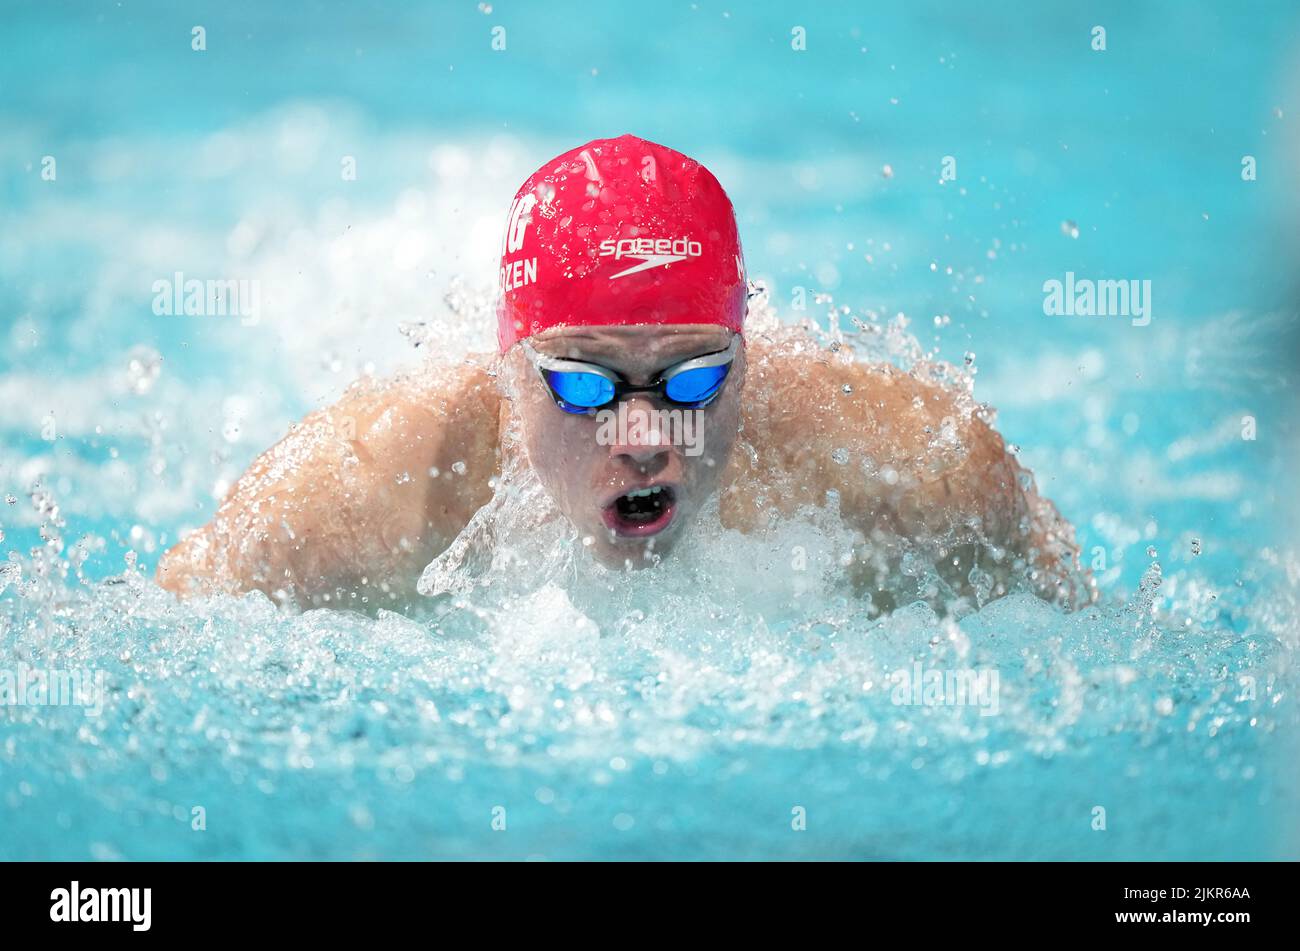 England's James David McFadzen in action the Men's 200m Individual Medley Heat 3 at Sandwell Aquatics Centre on day six of the 2022 Commonwealth Games in Birmingham. Picture date: Wednesday August 3, 2022. Stock Photo